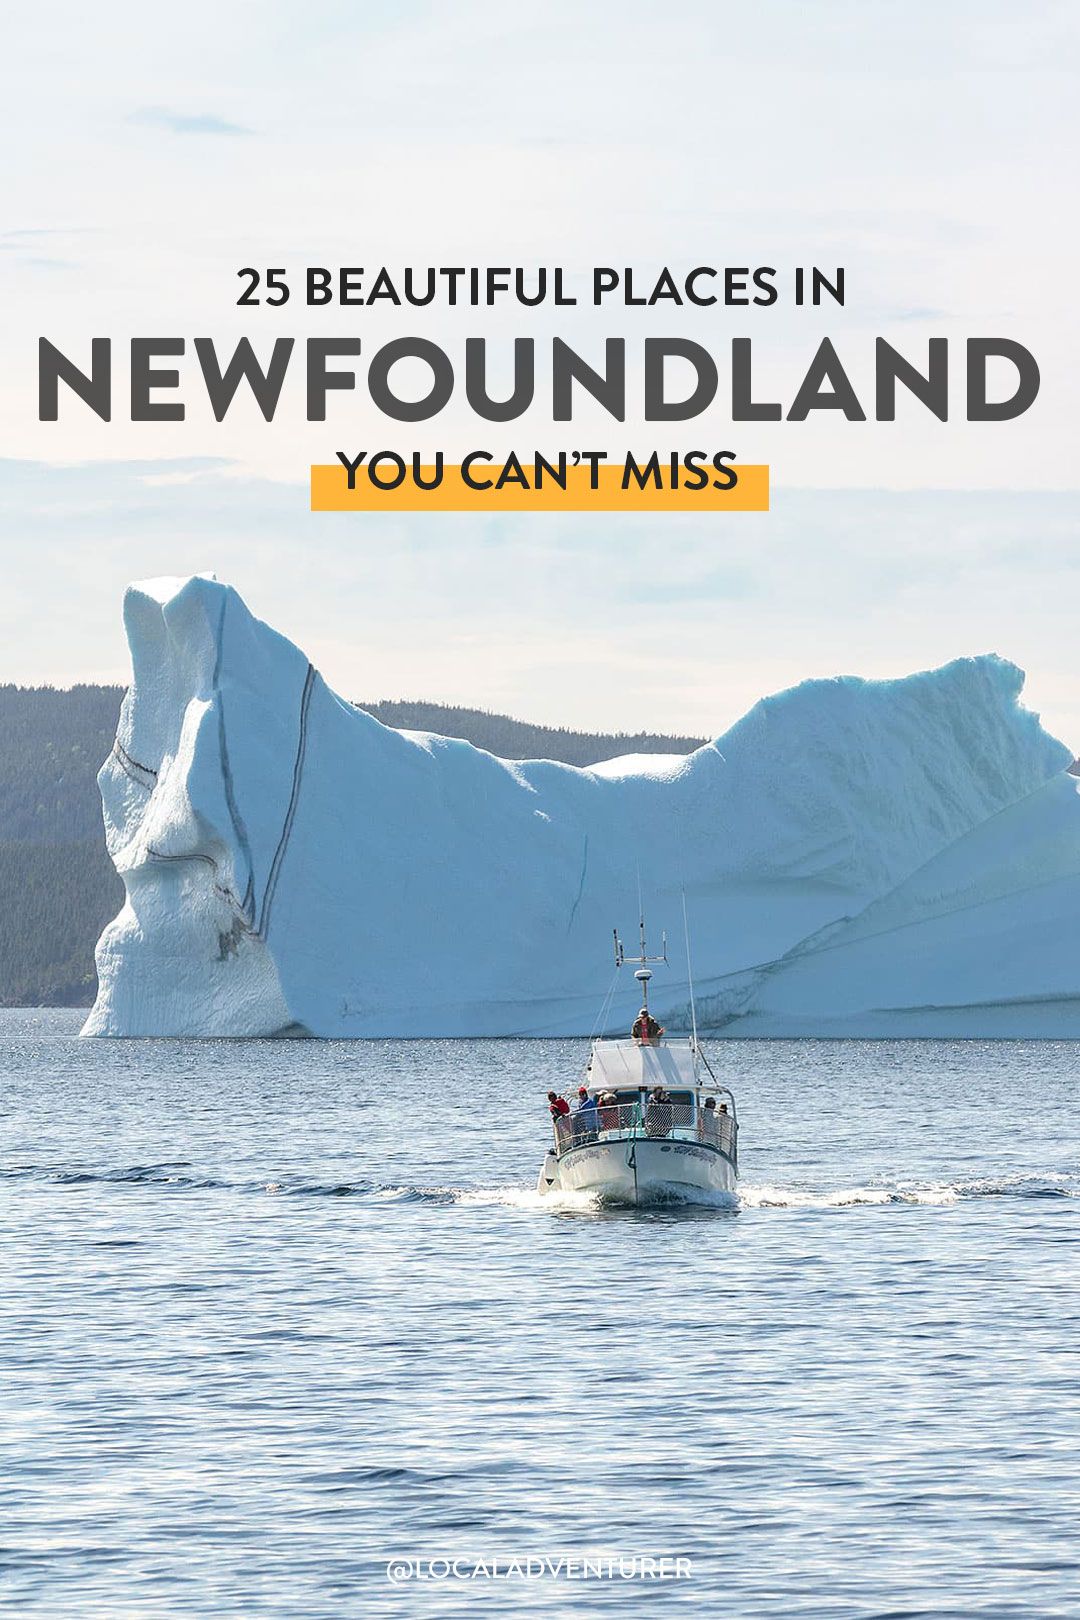 25 Unforgettable Places to Visit in Newfoundland and Labrador